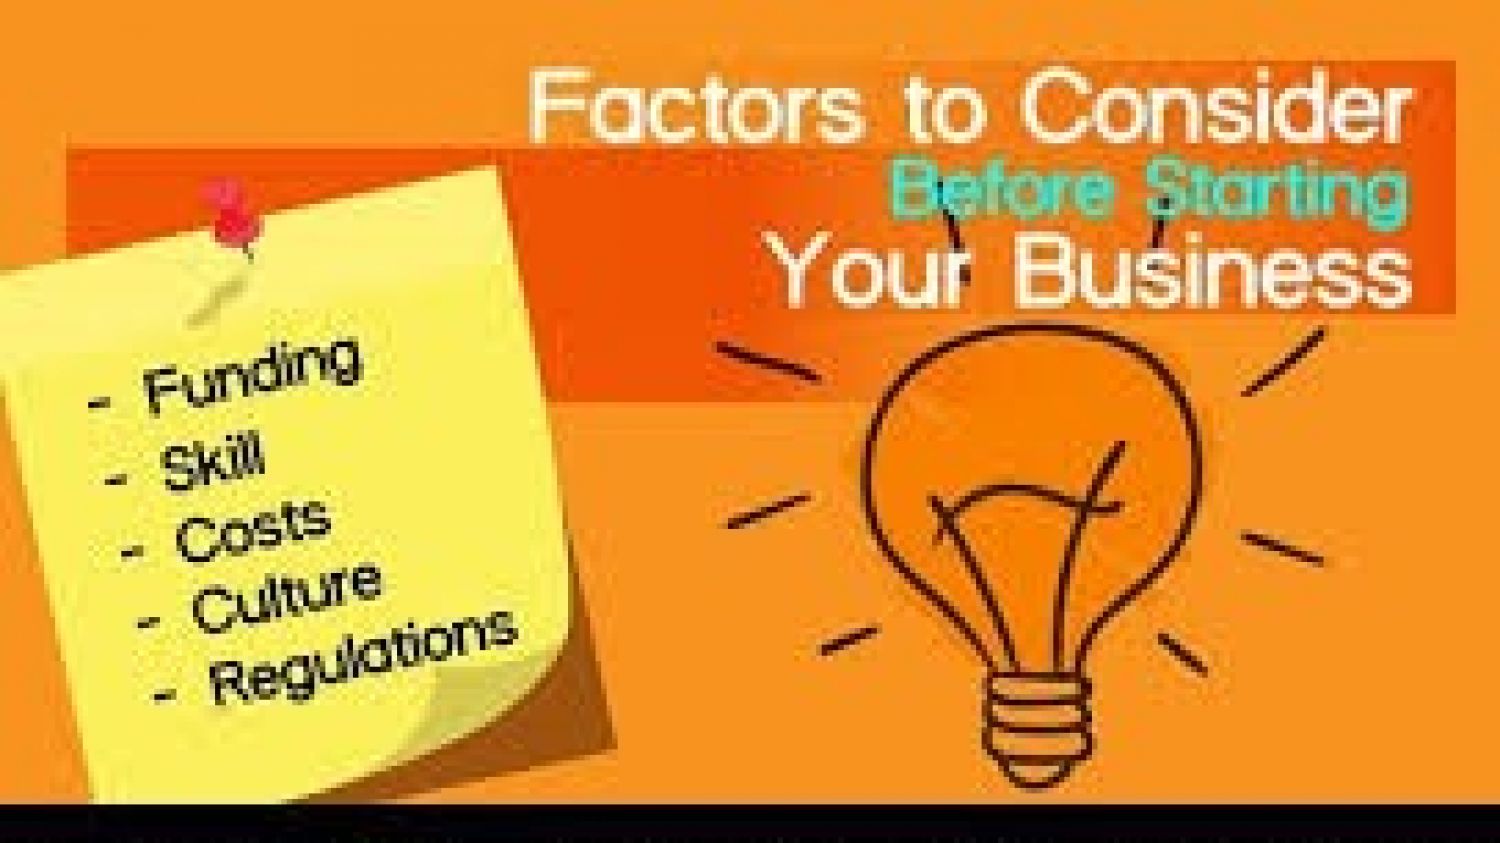 Key Points to Consider Before Choosing Types of Business